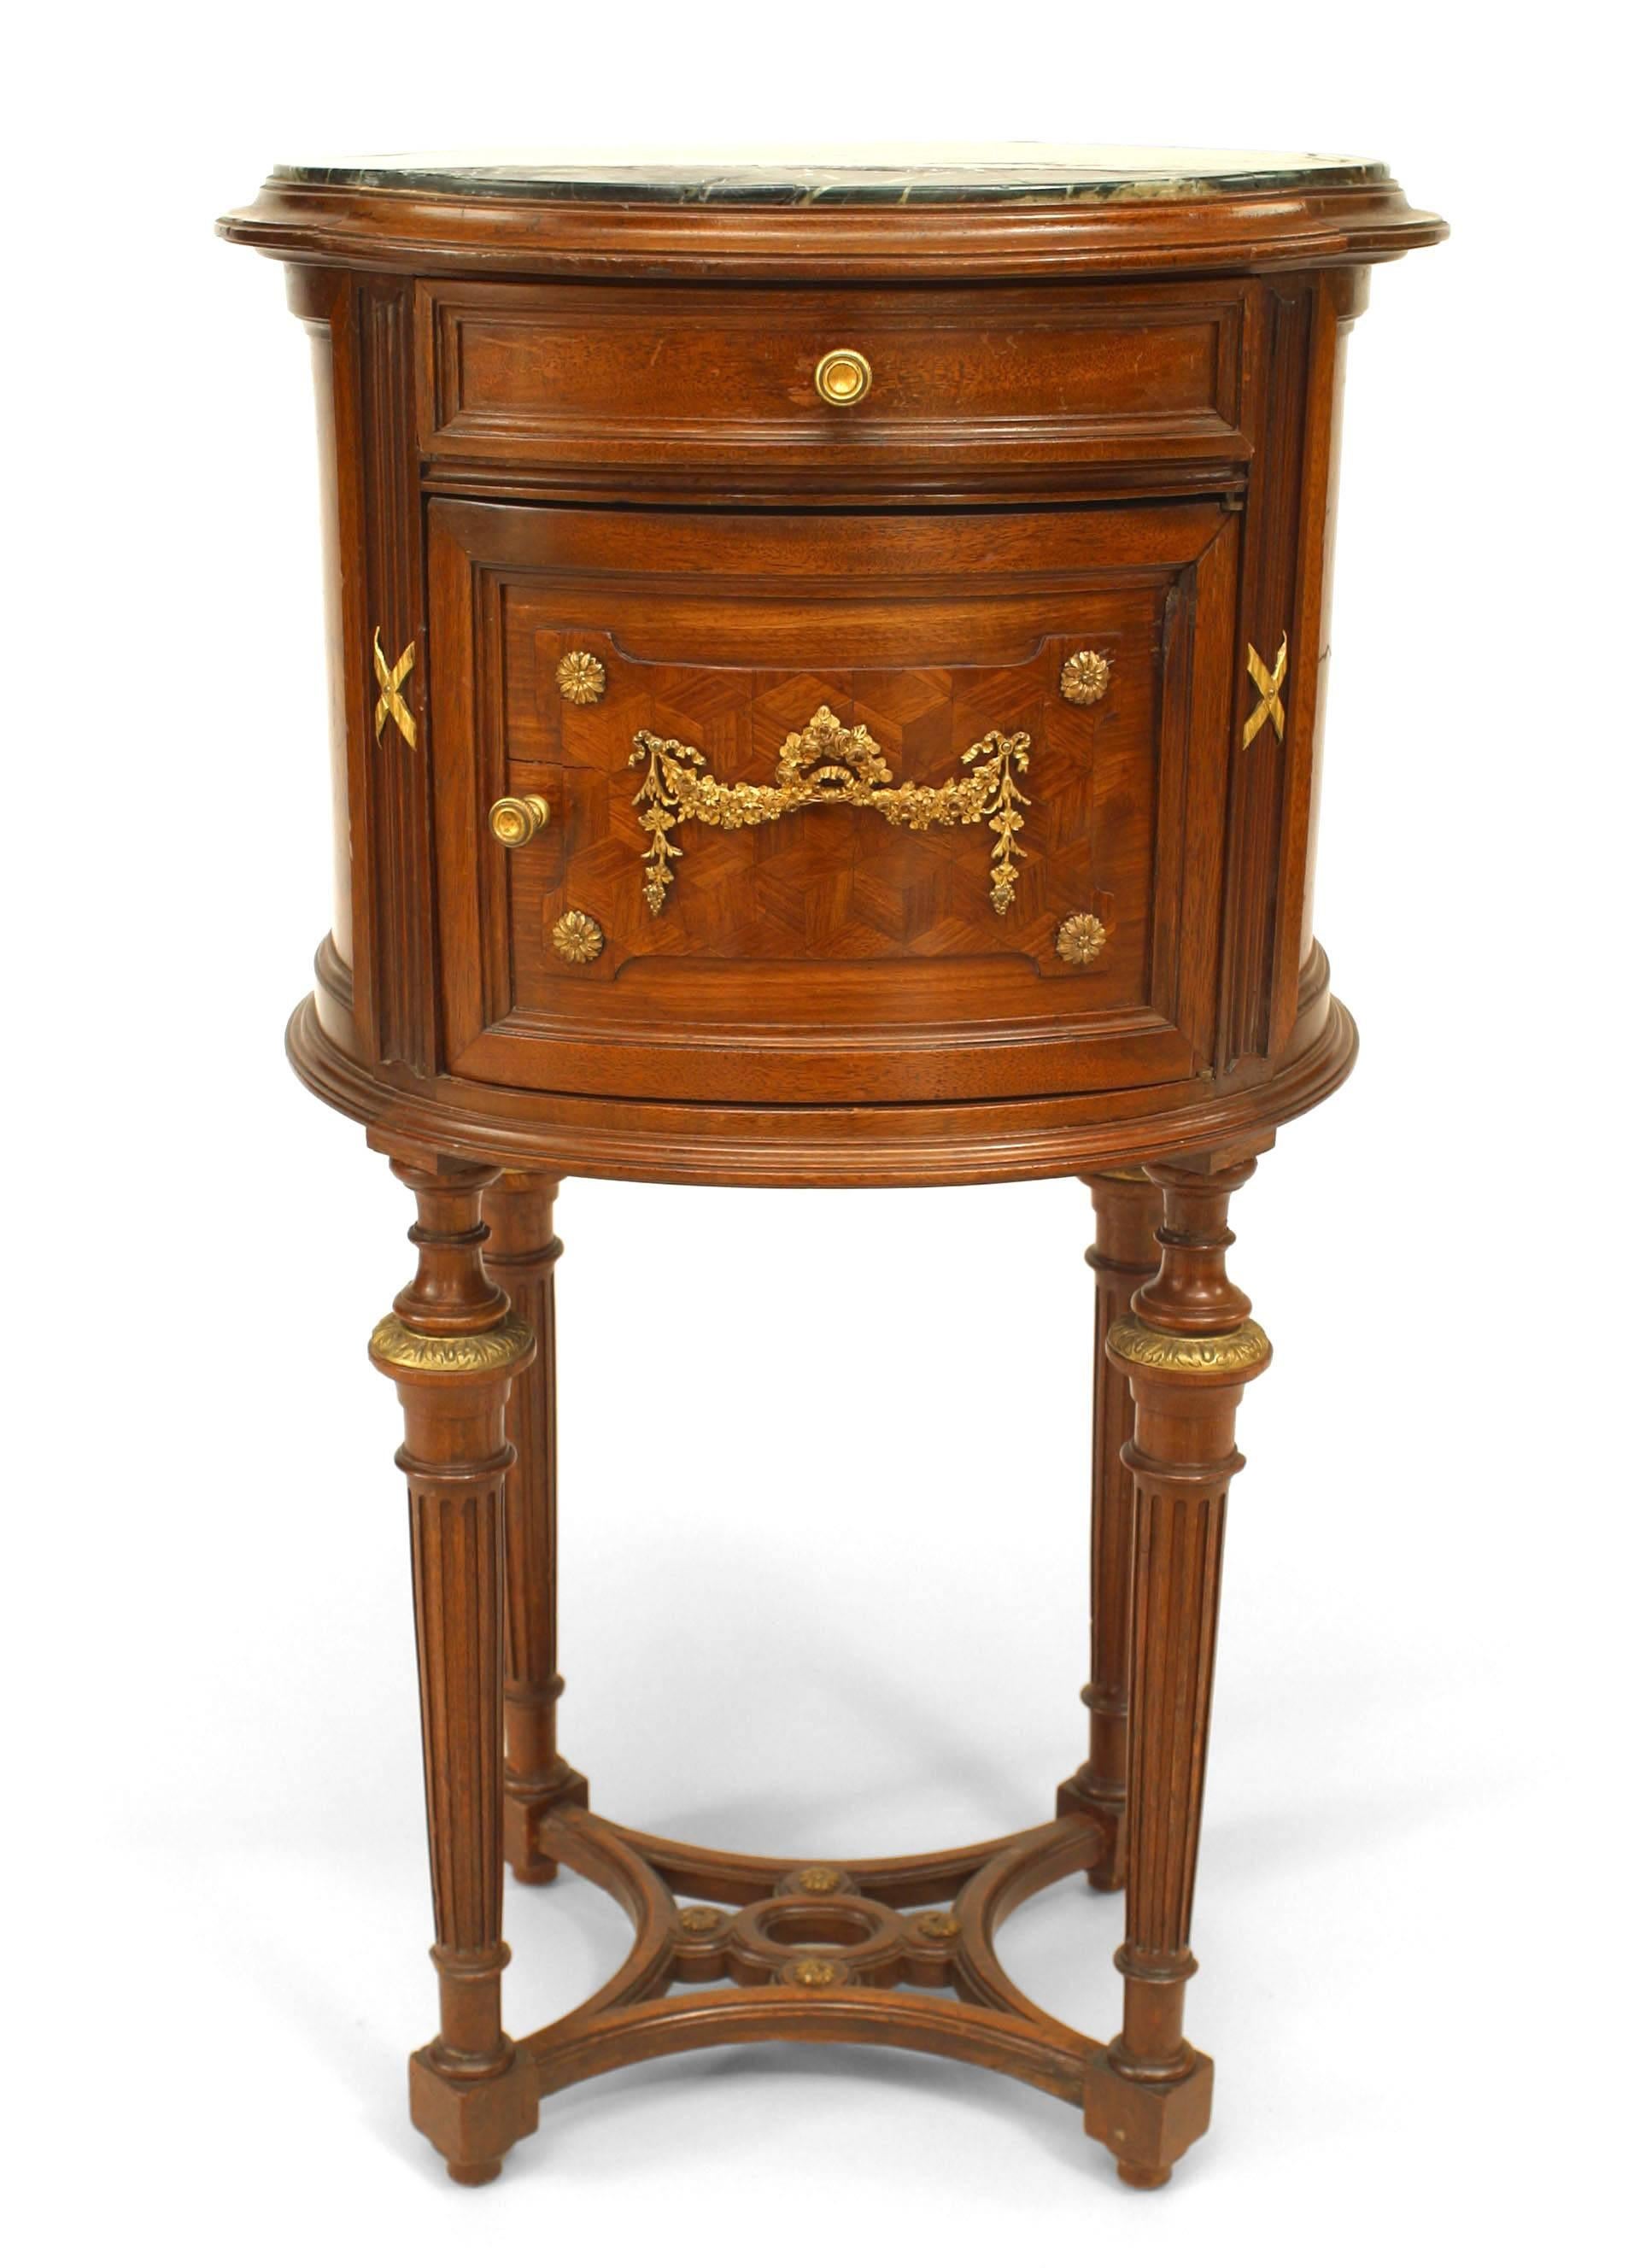 French Louis XVI-style (19th Century) oval mahogany bedside commode with open stretcher and green marble top.
